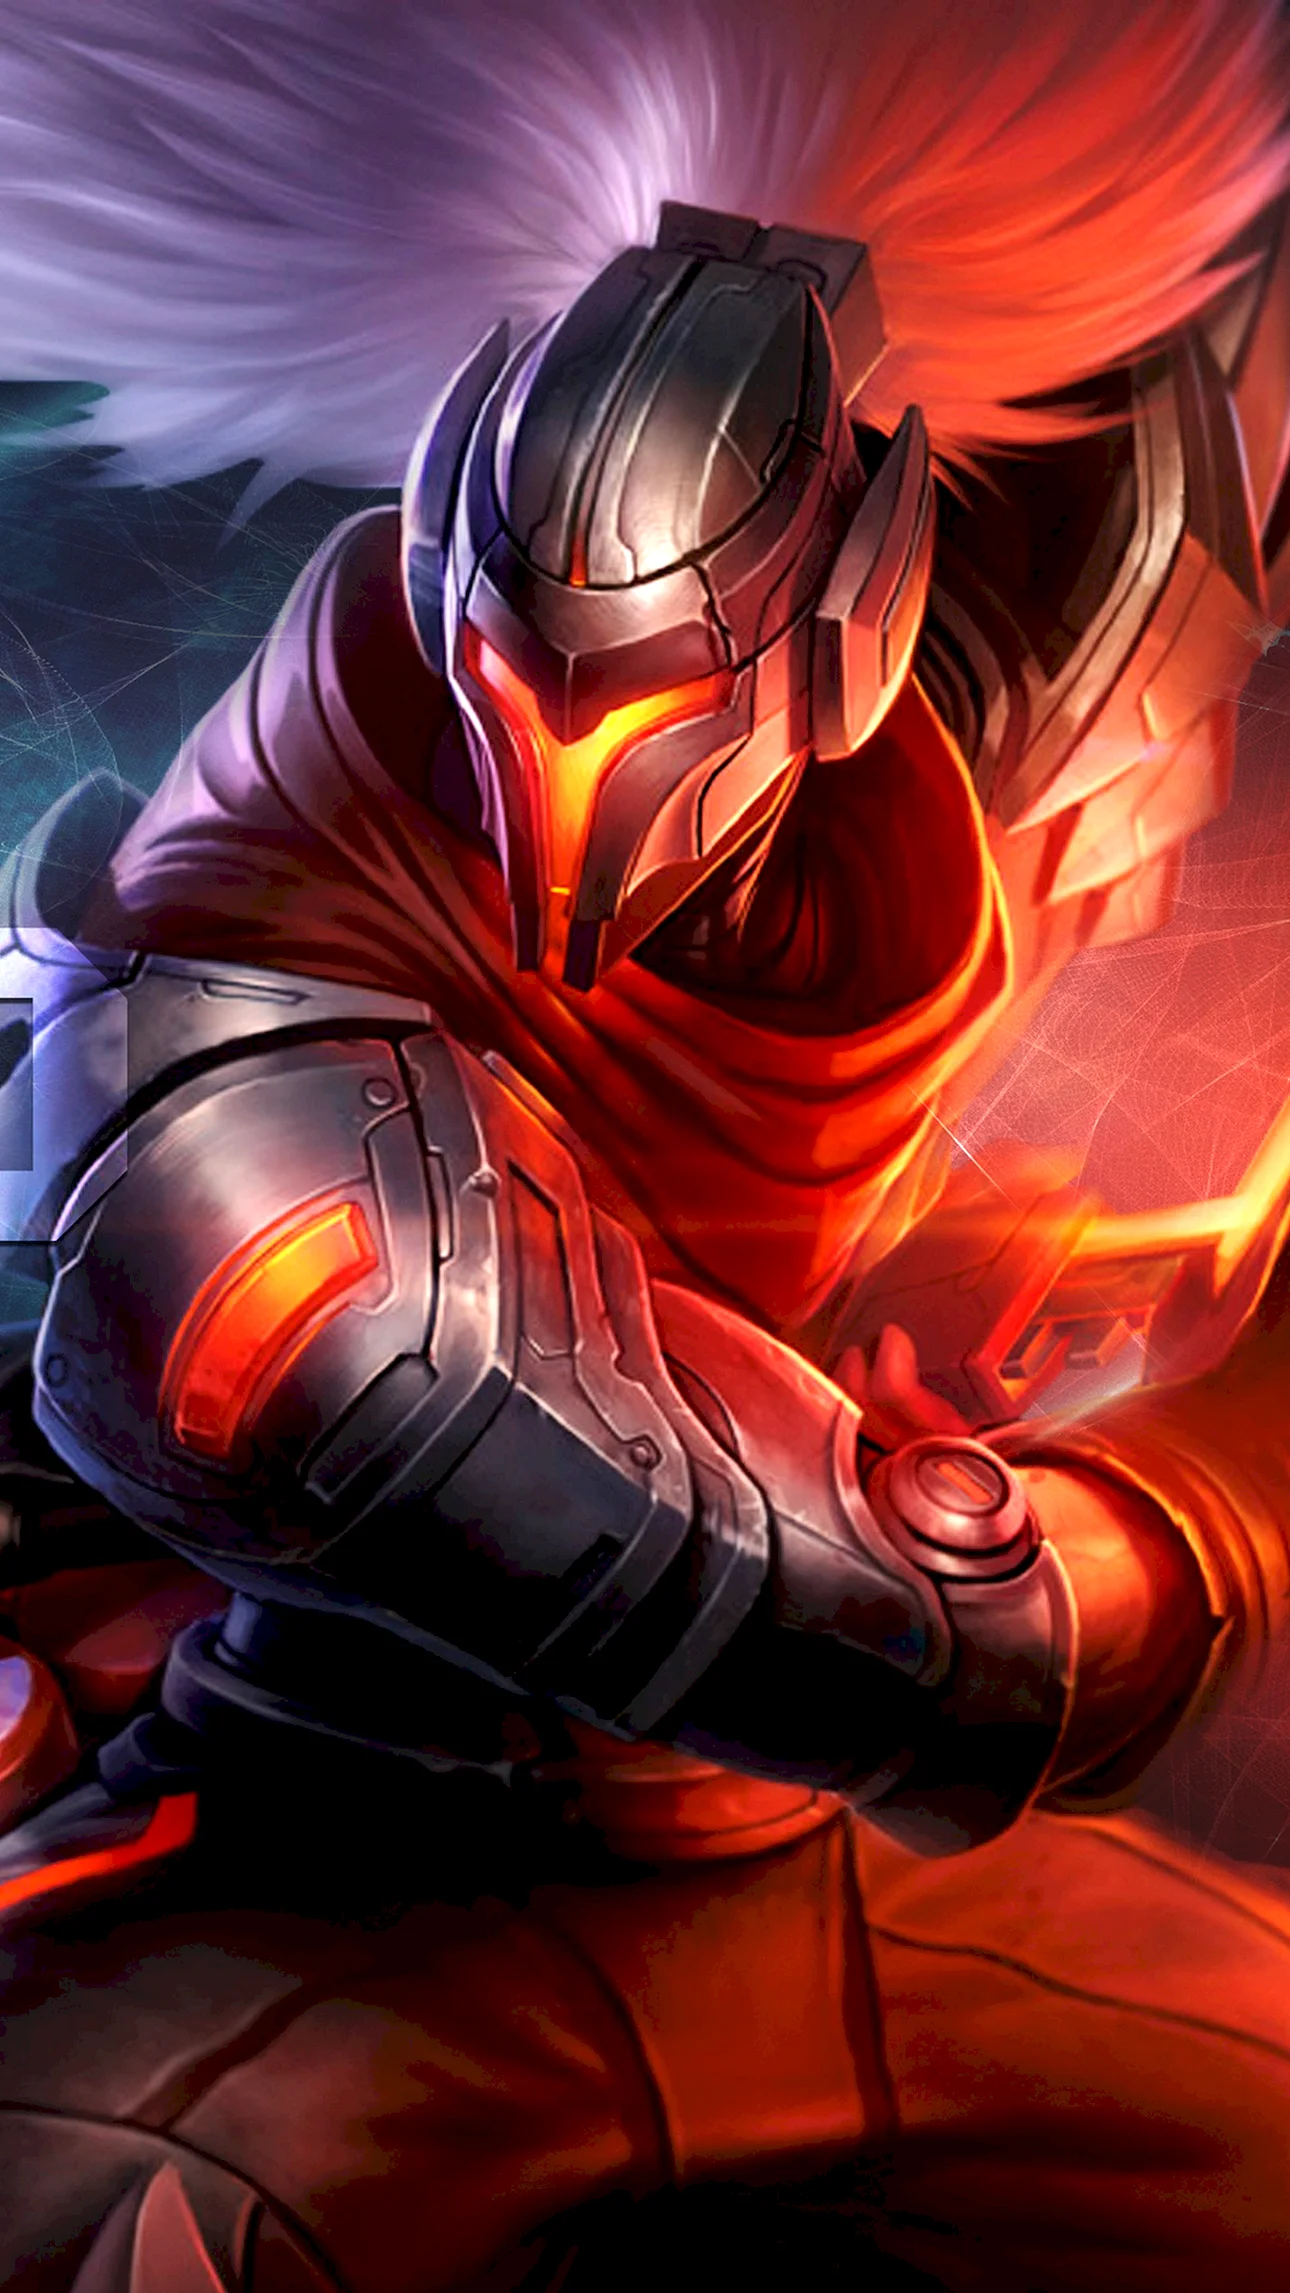 Project Yasuo Wallpaper For iPhone